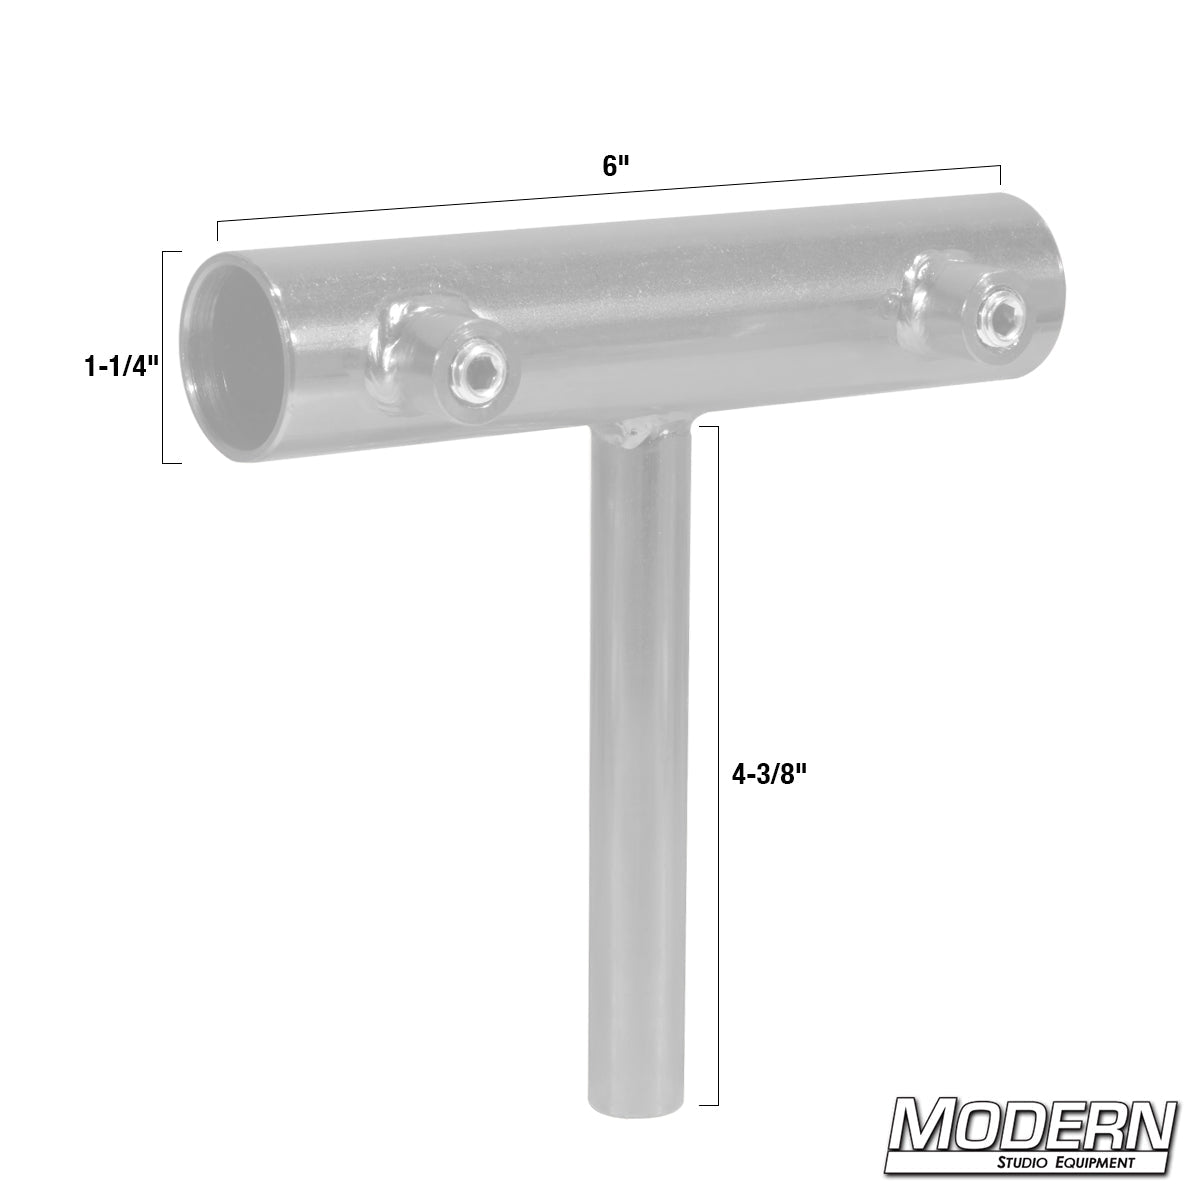 Pipe Frame Sleeve with 5/8" Pin for 3/4" Speed-Rail®.